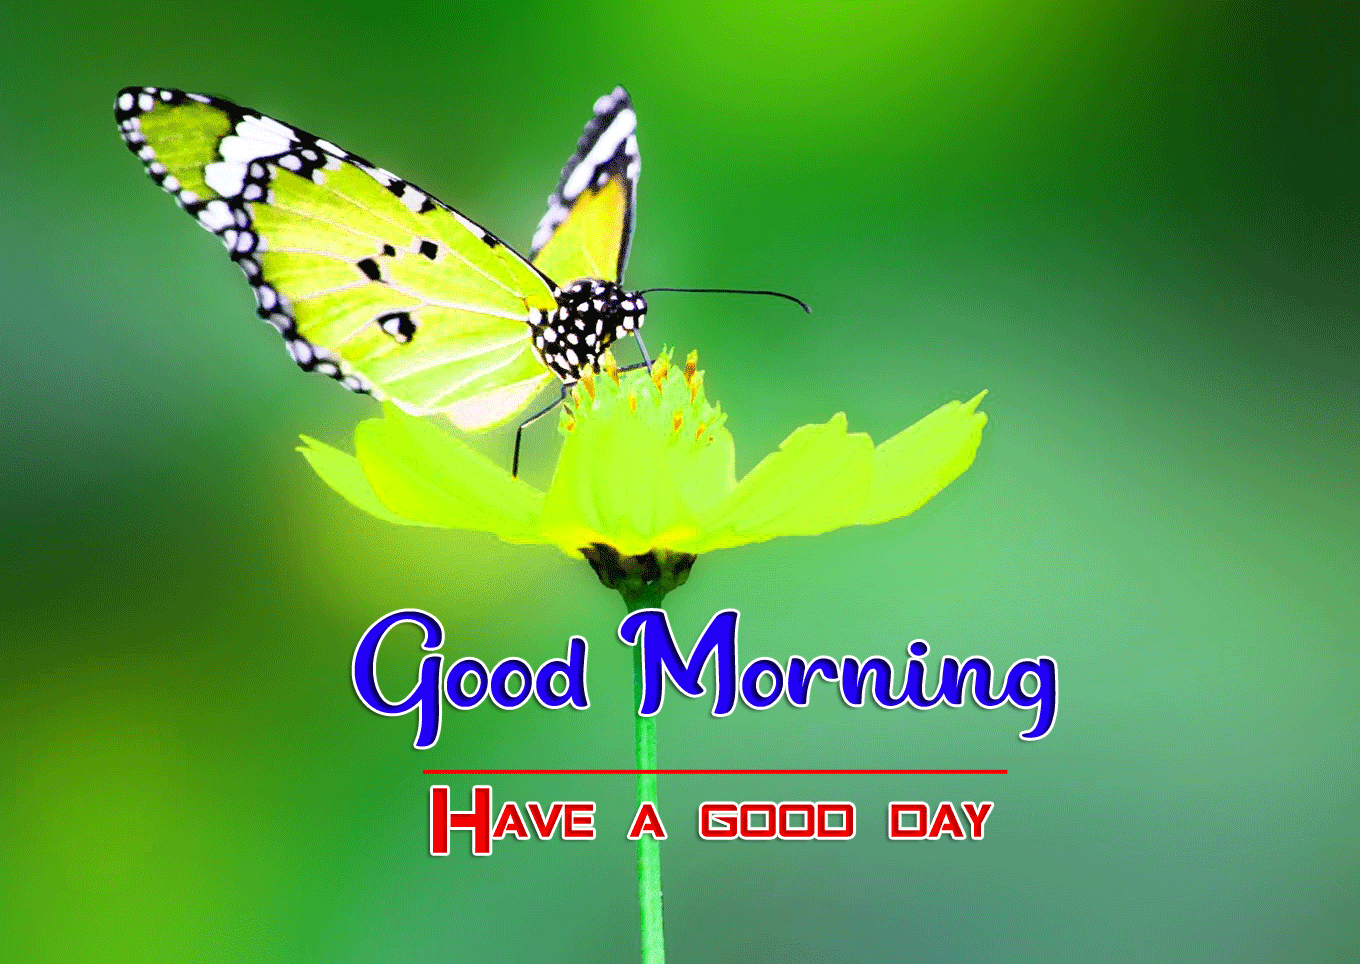 Good Morning Wishes Images HD 1080p 32